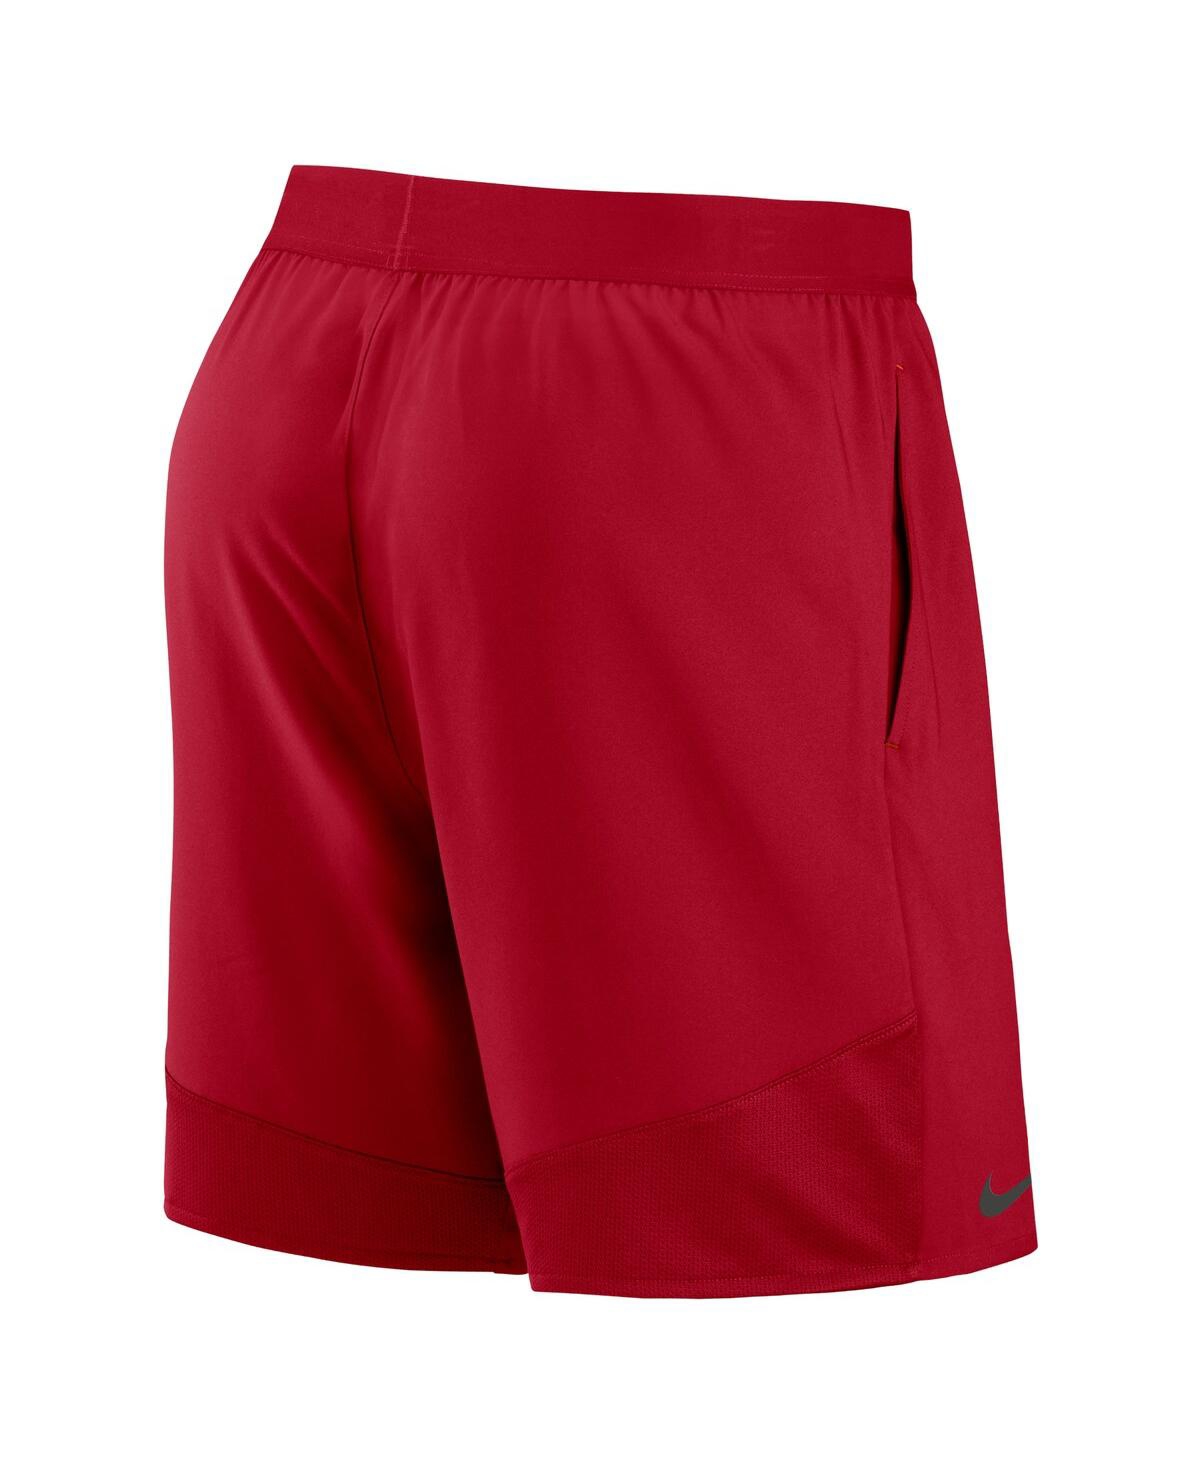 Shop Nike Men's  Red Tampa Bay Buccaneers Stretch Woven Shorts